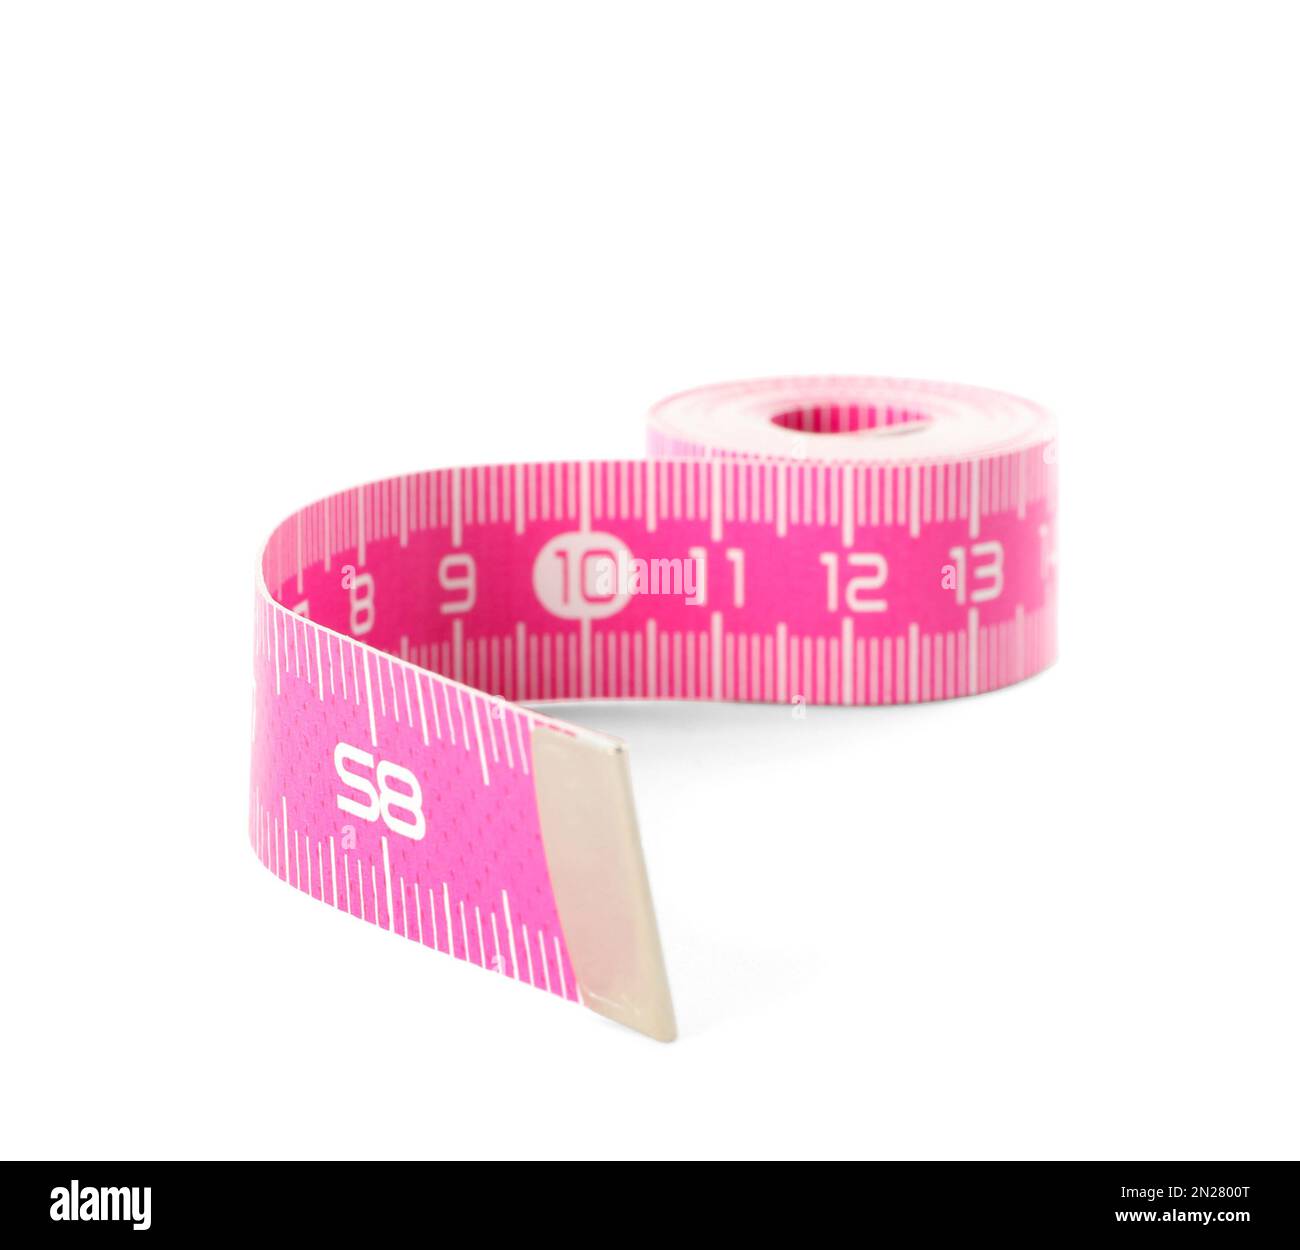 Pink measuring tape isolated on white background Stock Photo by ©DNKSTUDIO  17429949